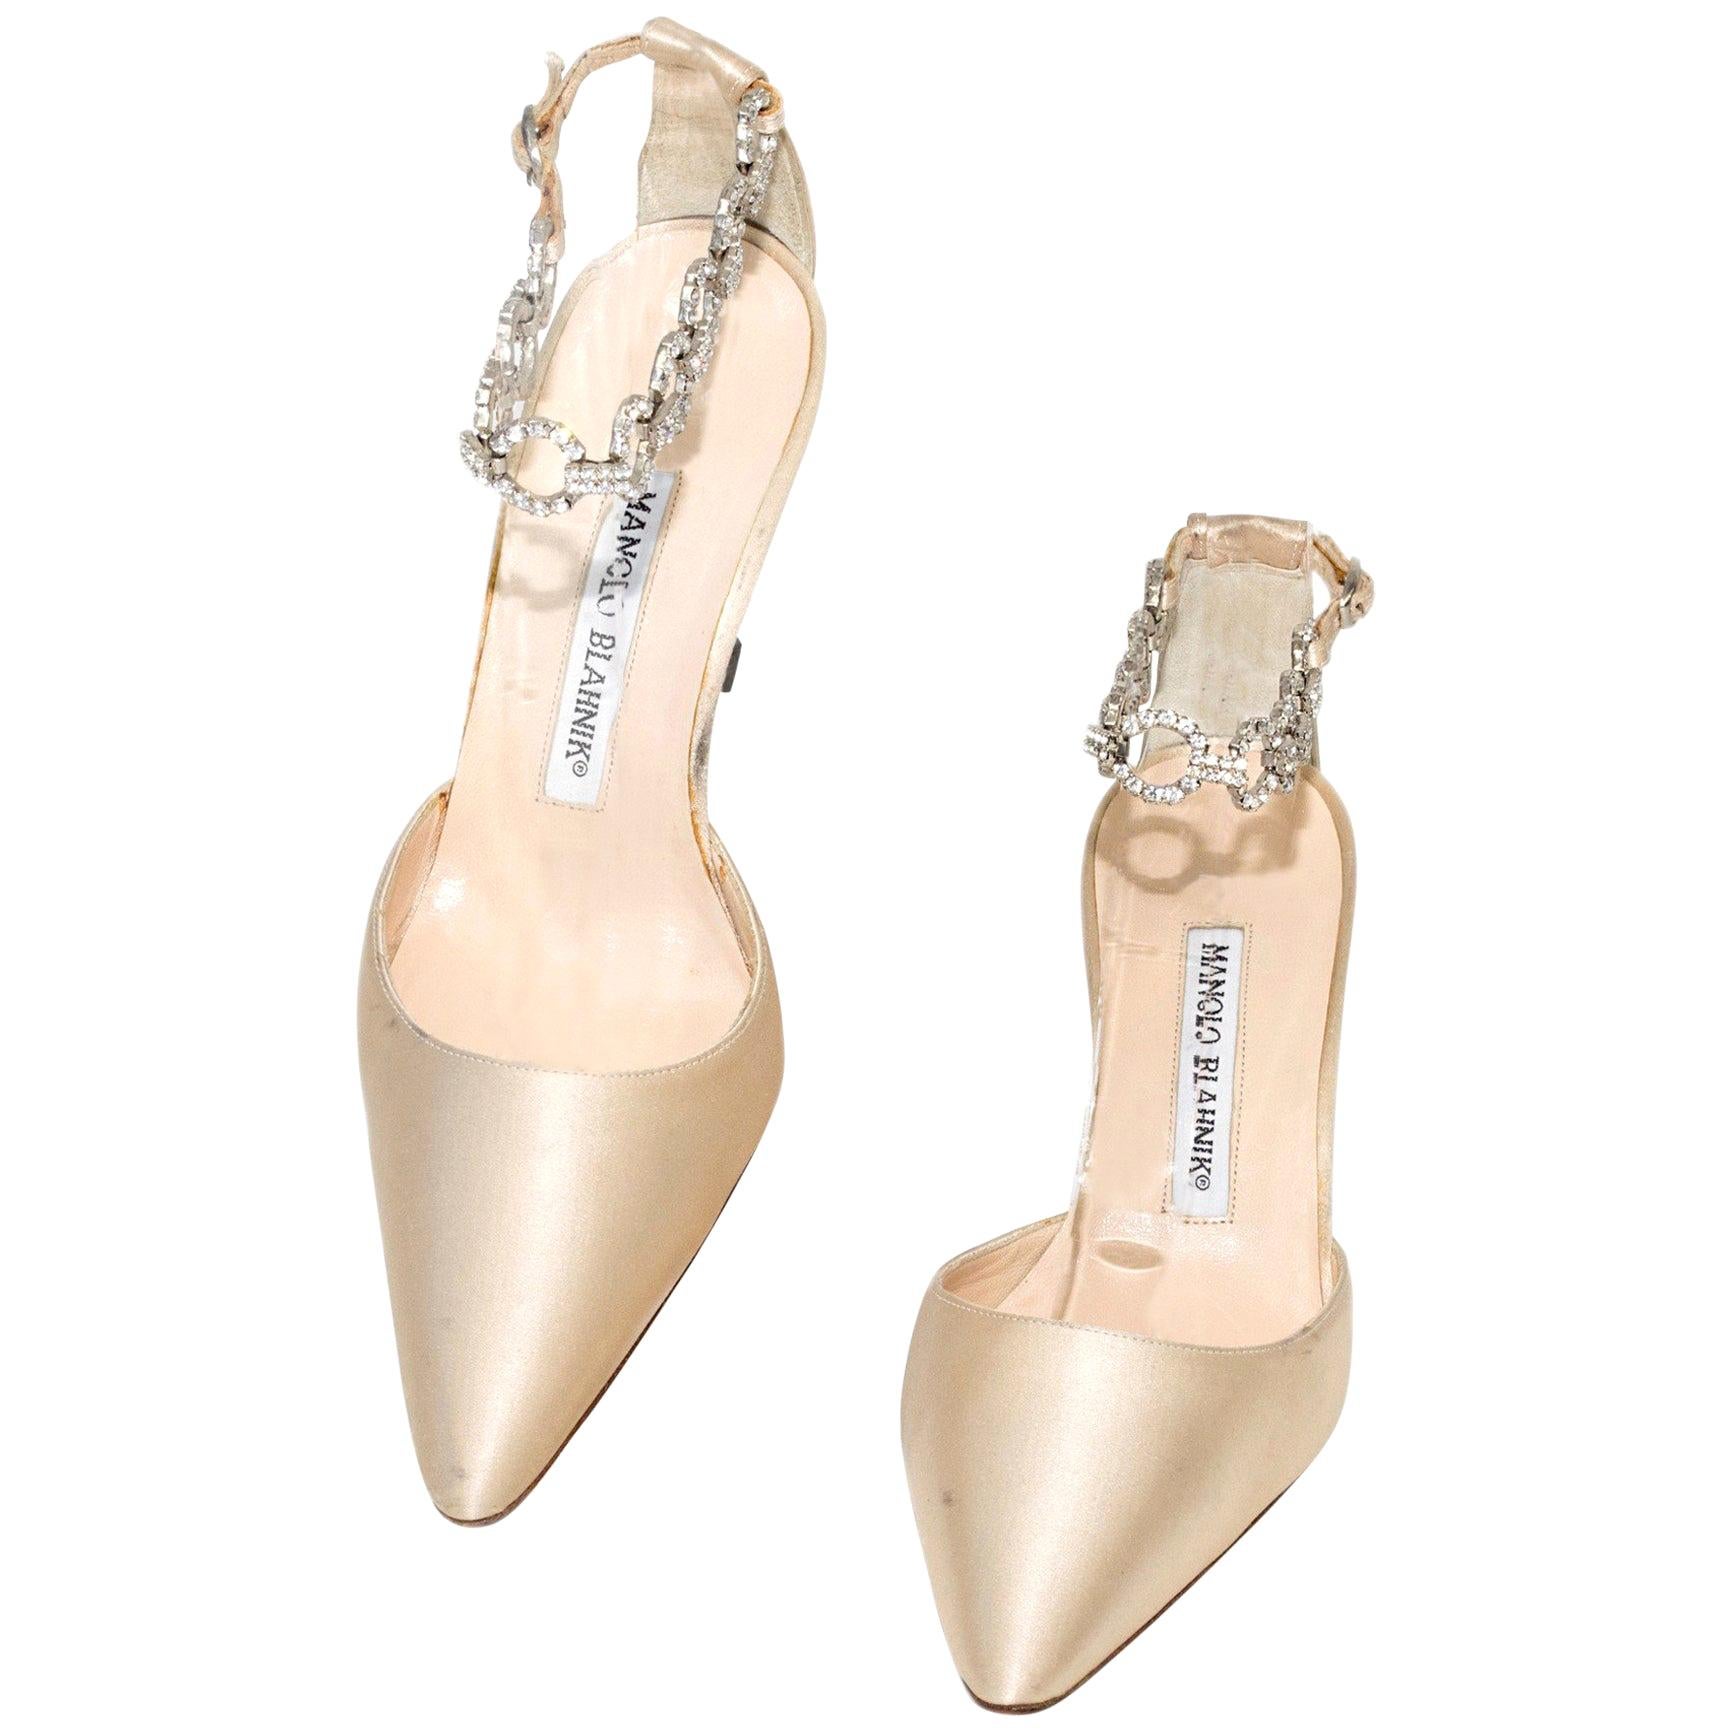 Manolo Blahnik Champagne Pointed Toe Heel With Rhinestone Ankle Strap